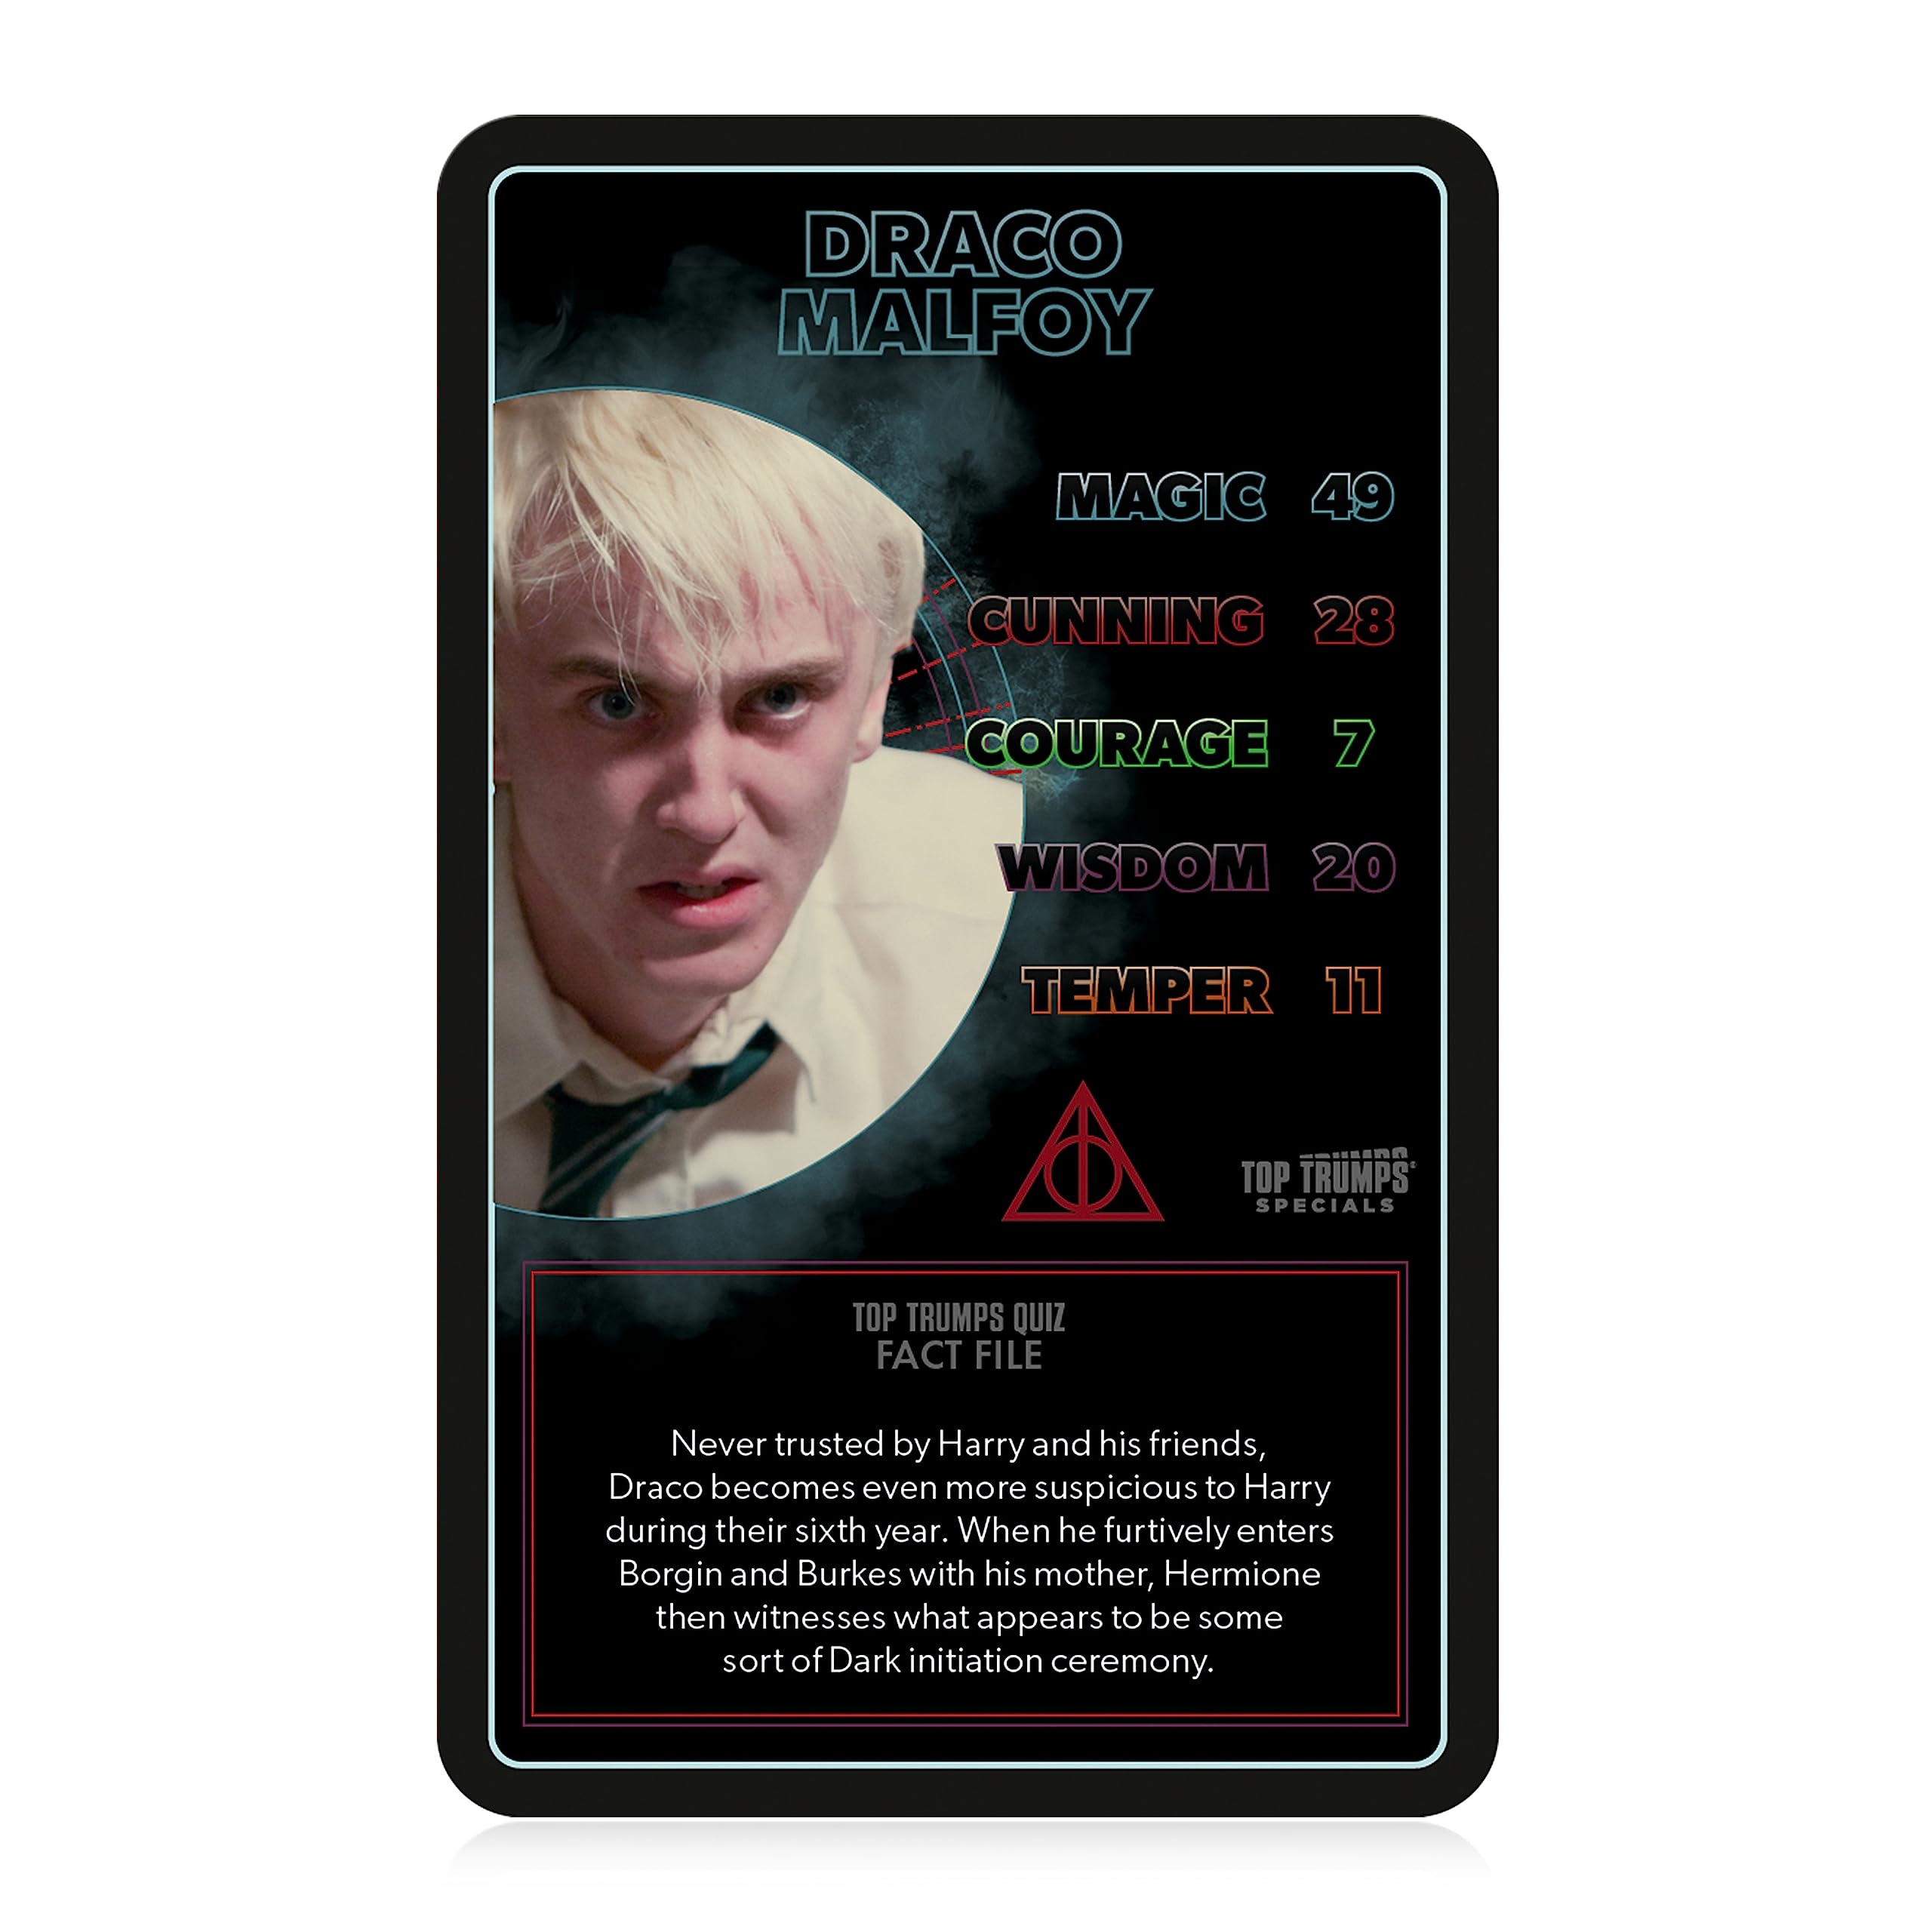 Harry Potter Dark Magic Top Trumps Card Game; Entertaining and exciting with Your Favorite Dark Wizards, Creatures & More|Fun Family Game for Ages 6 & up